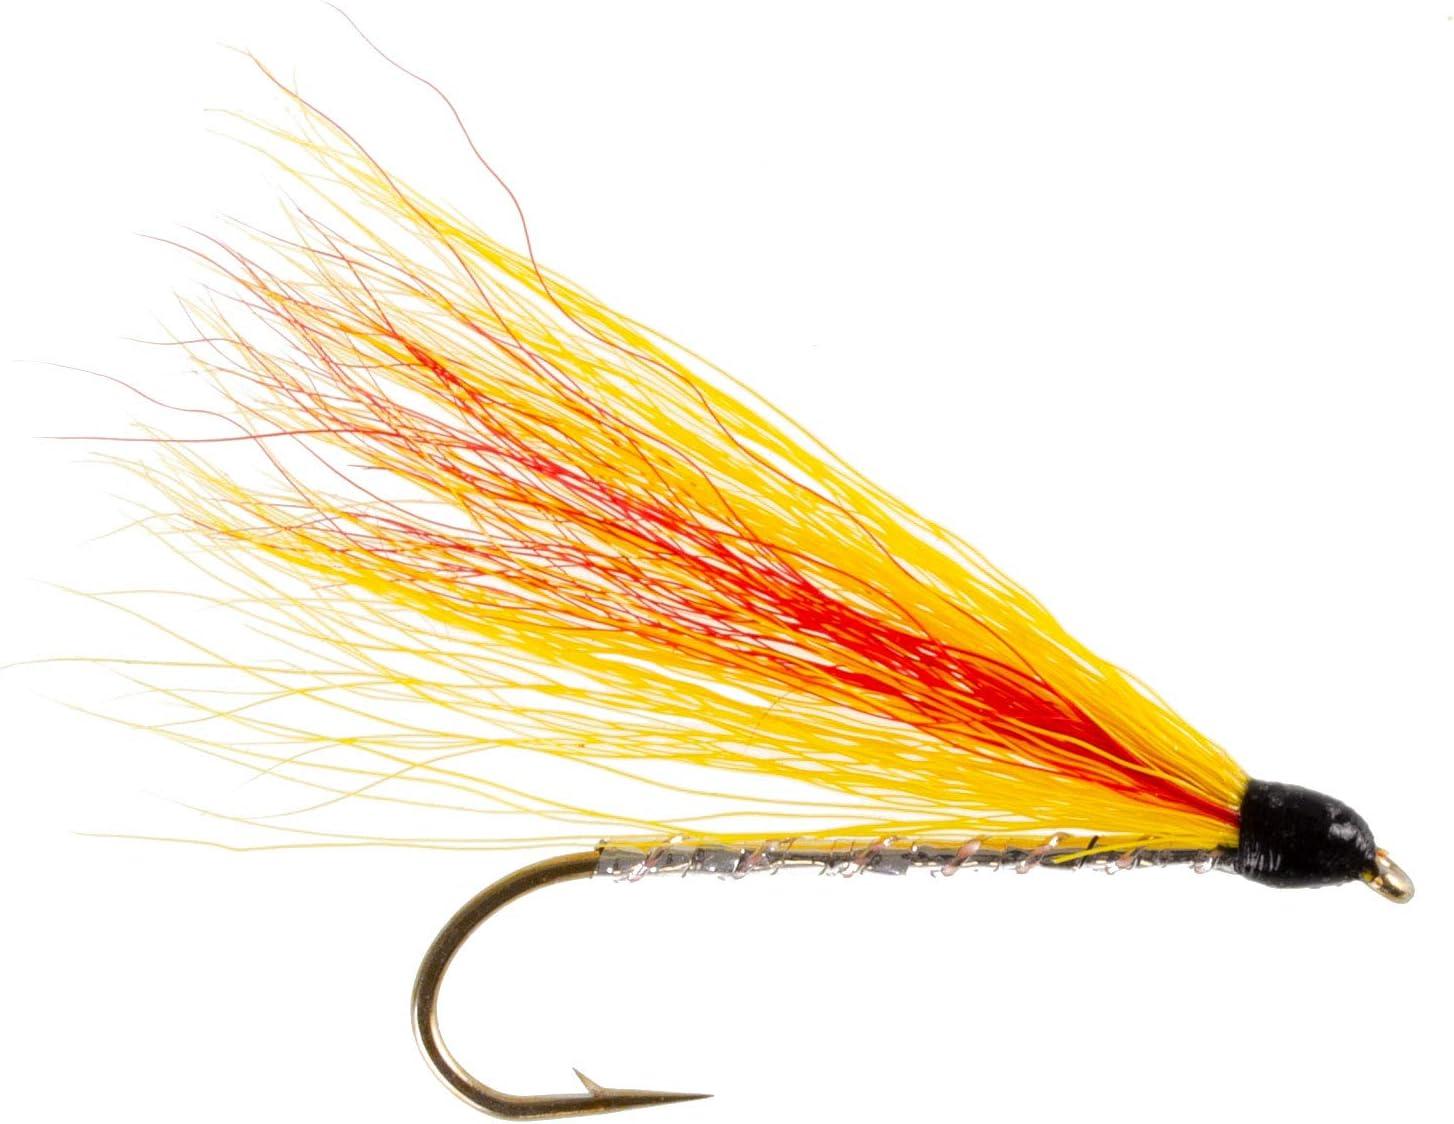 The Fly Fishing Place Classic Streamers Fly Fishing Flies Collection -  Assortment of 12 Trout Wet Fly Streamer Flies - Hook Size 4